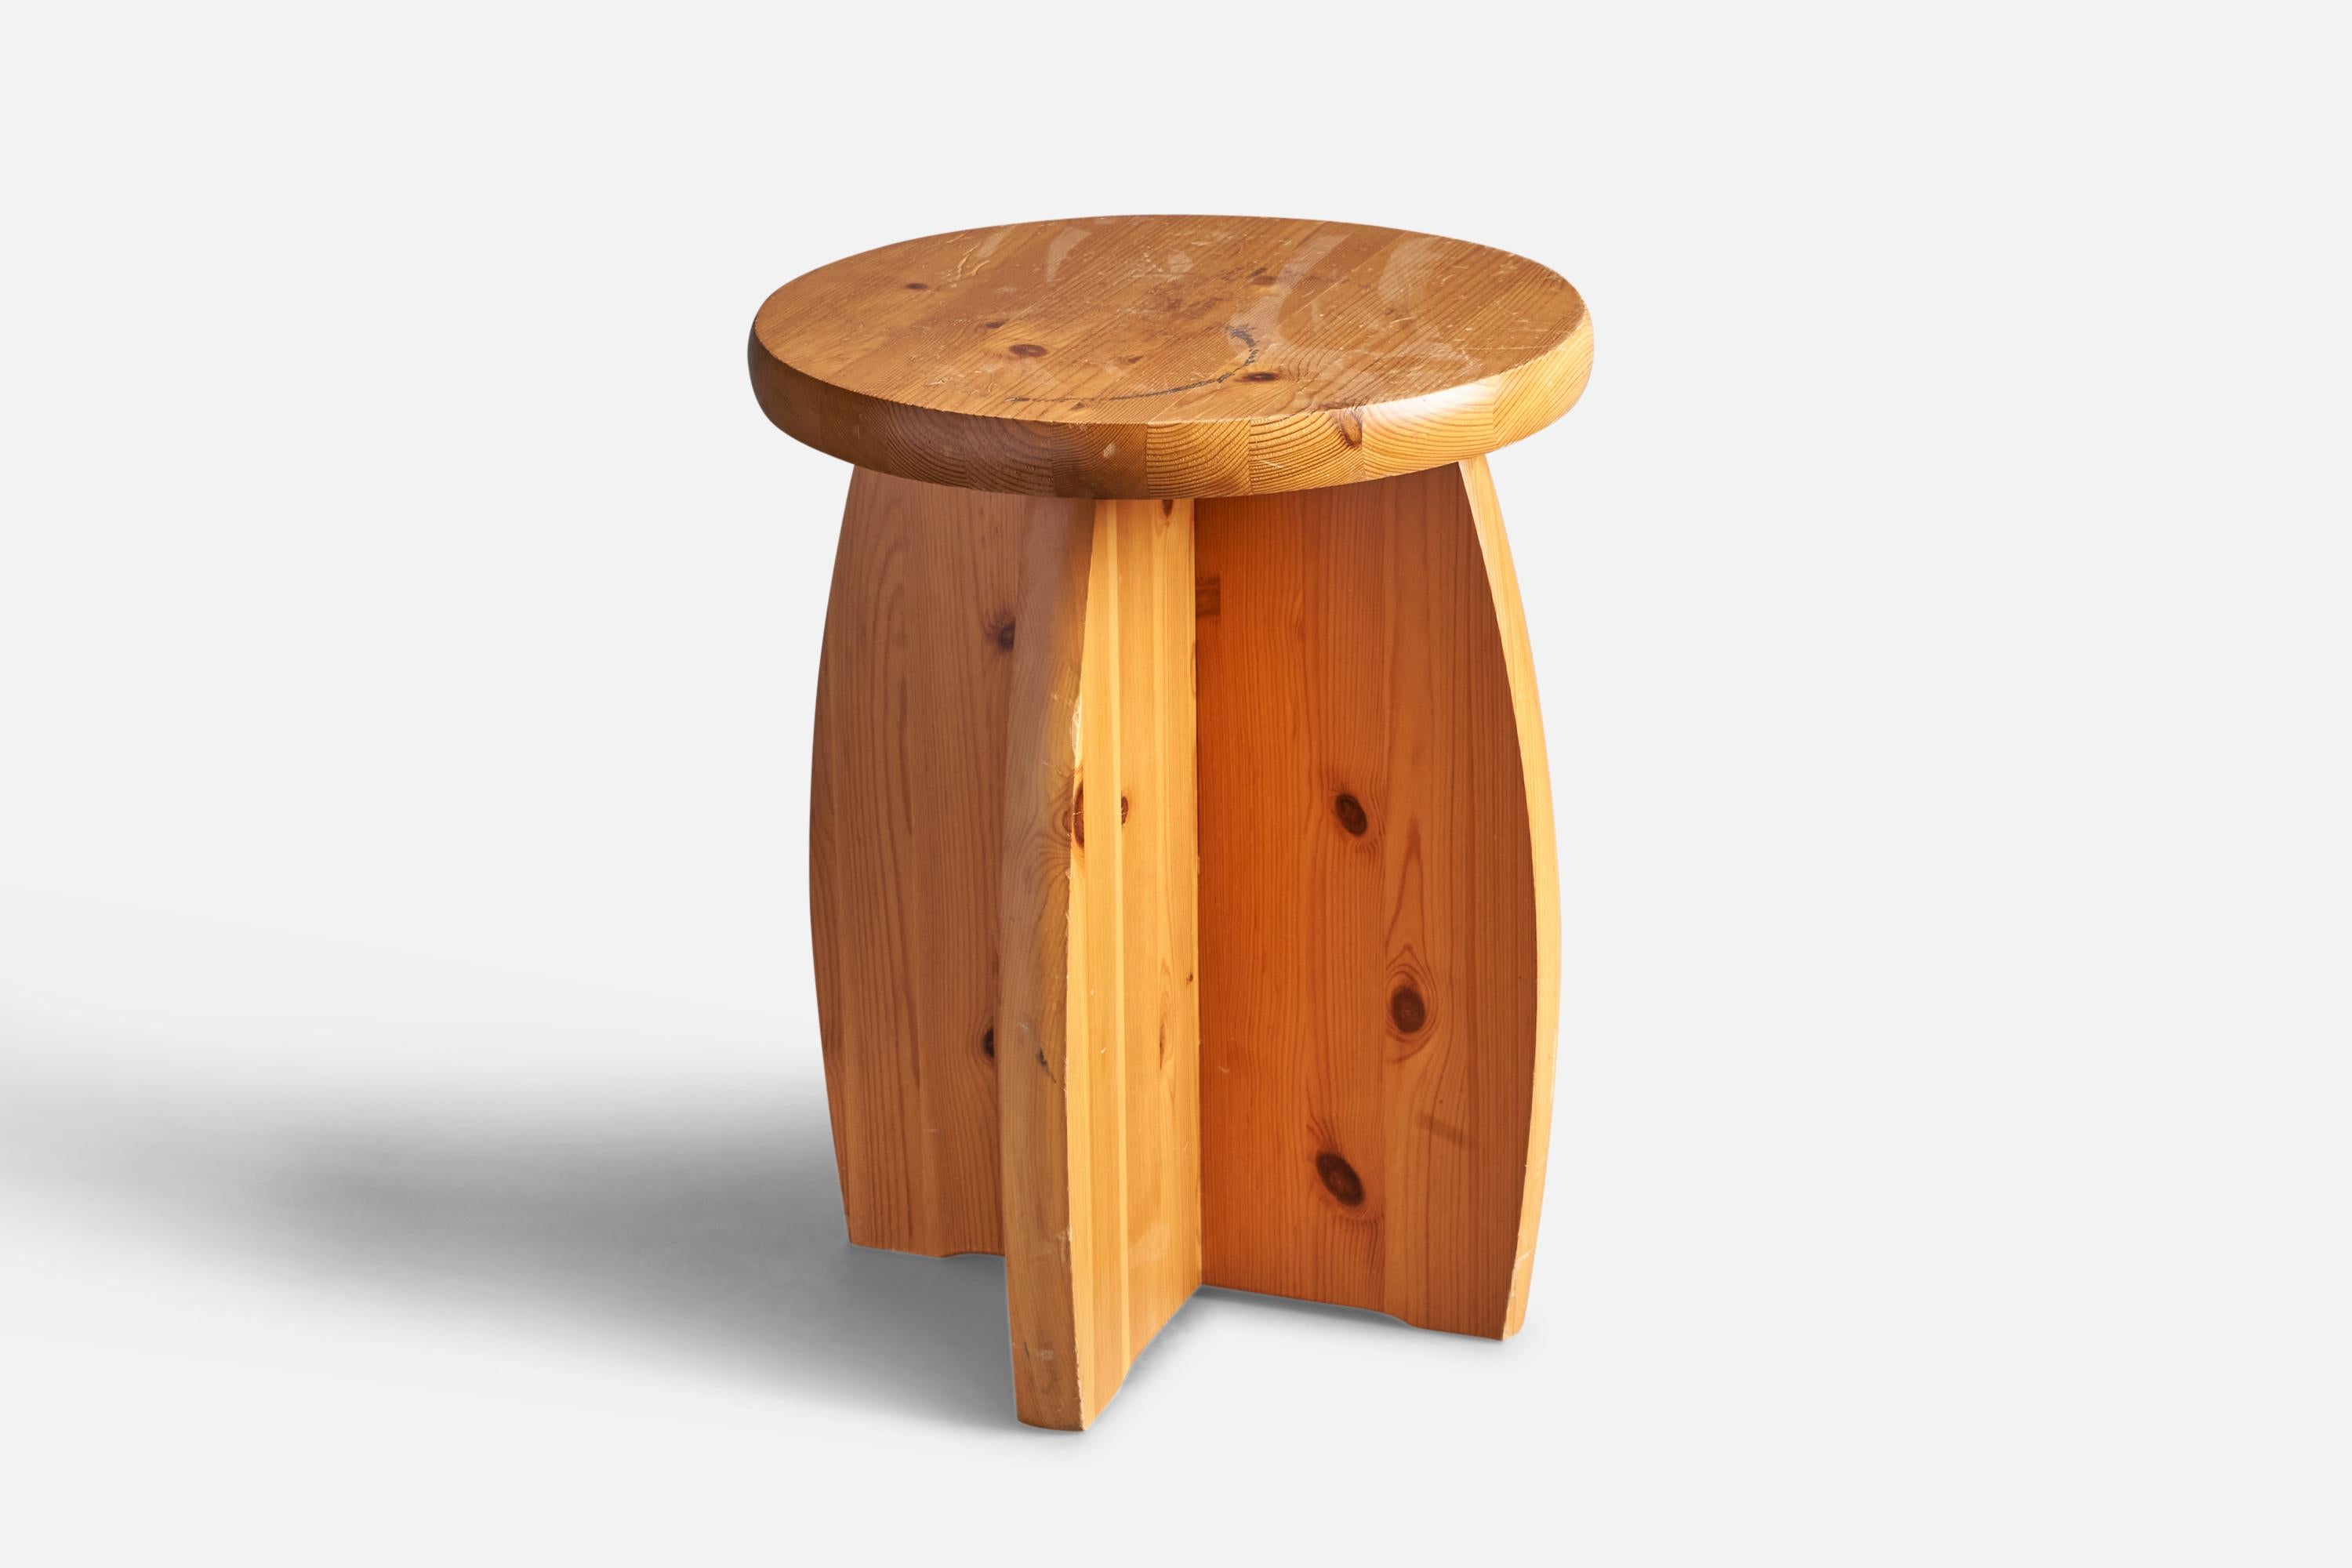 A solid pine stool, designed and produced in Sweden, c. 1970s